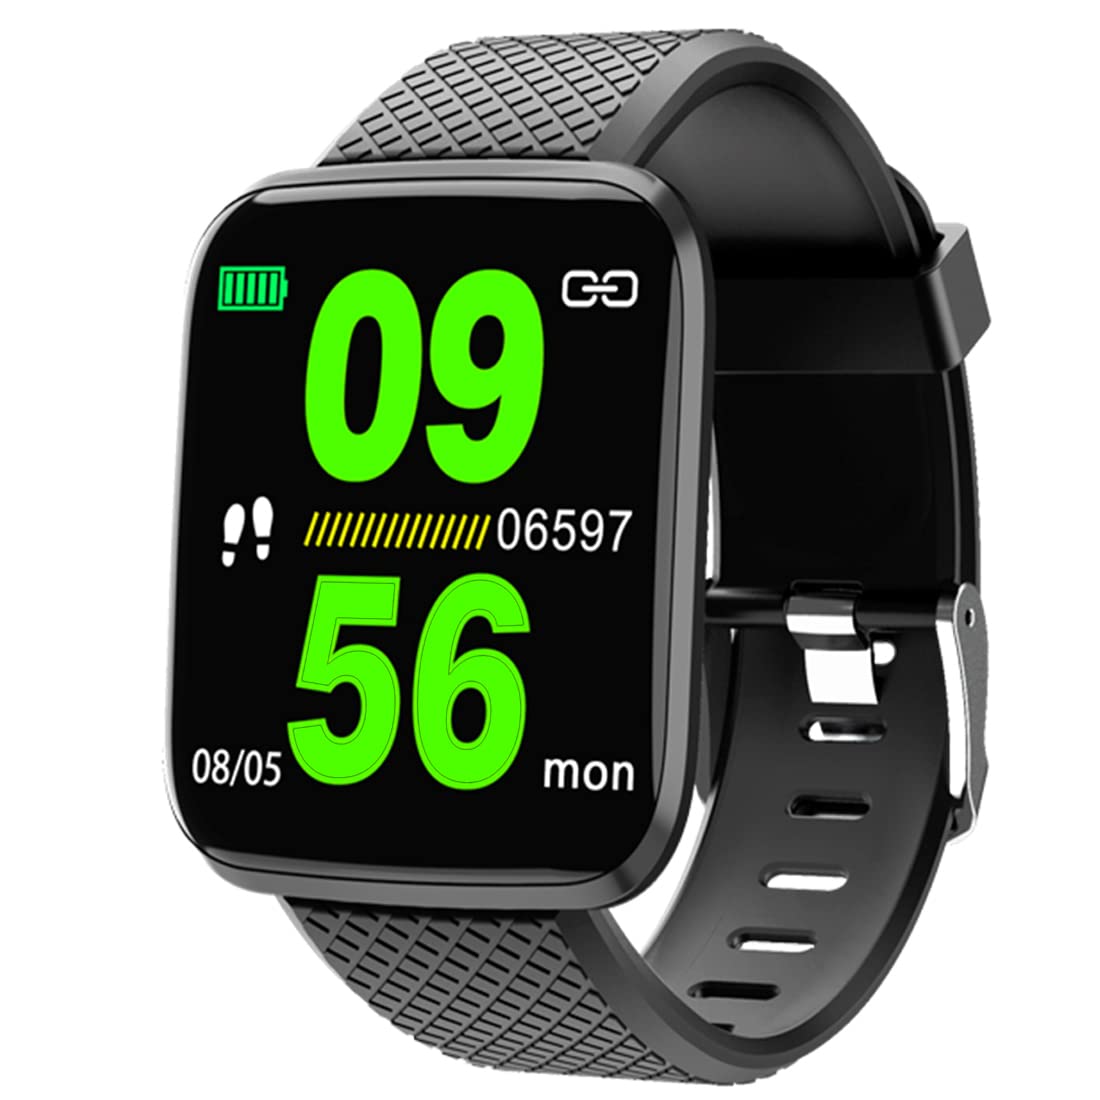 M I ID116 Fitness Band Smart Watch for Men, Women, Boys, Girls, Kids – Single Touch Interface, Water Resistant, Workout Modes, Quick Charge Sports Smartwatch – Black